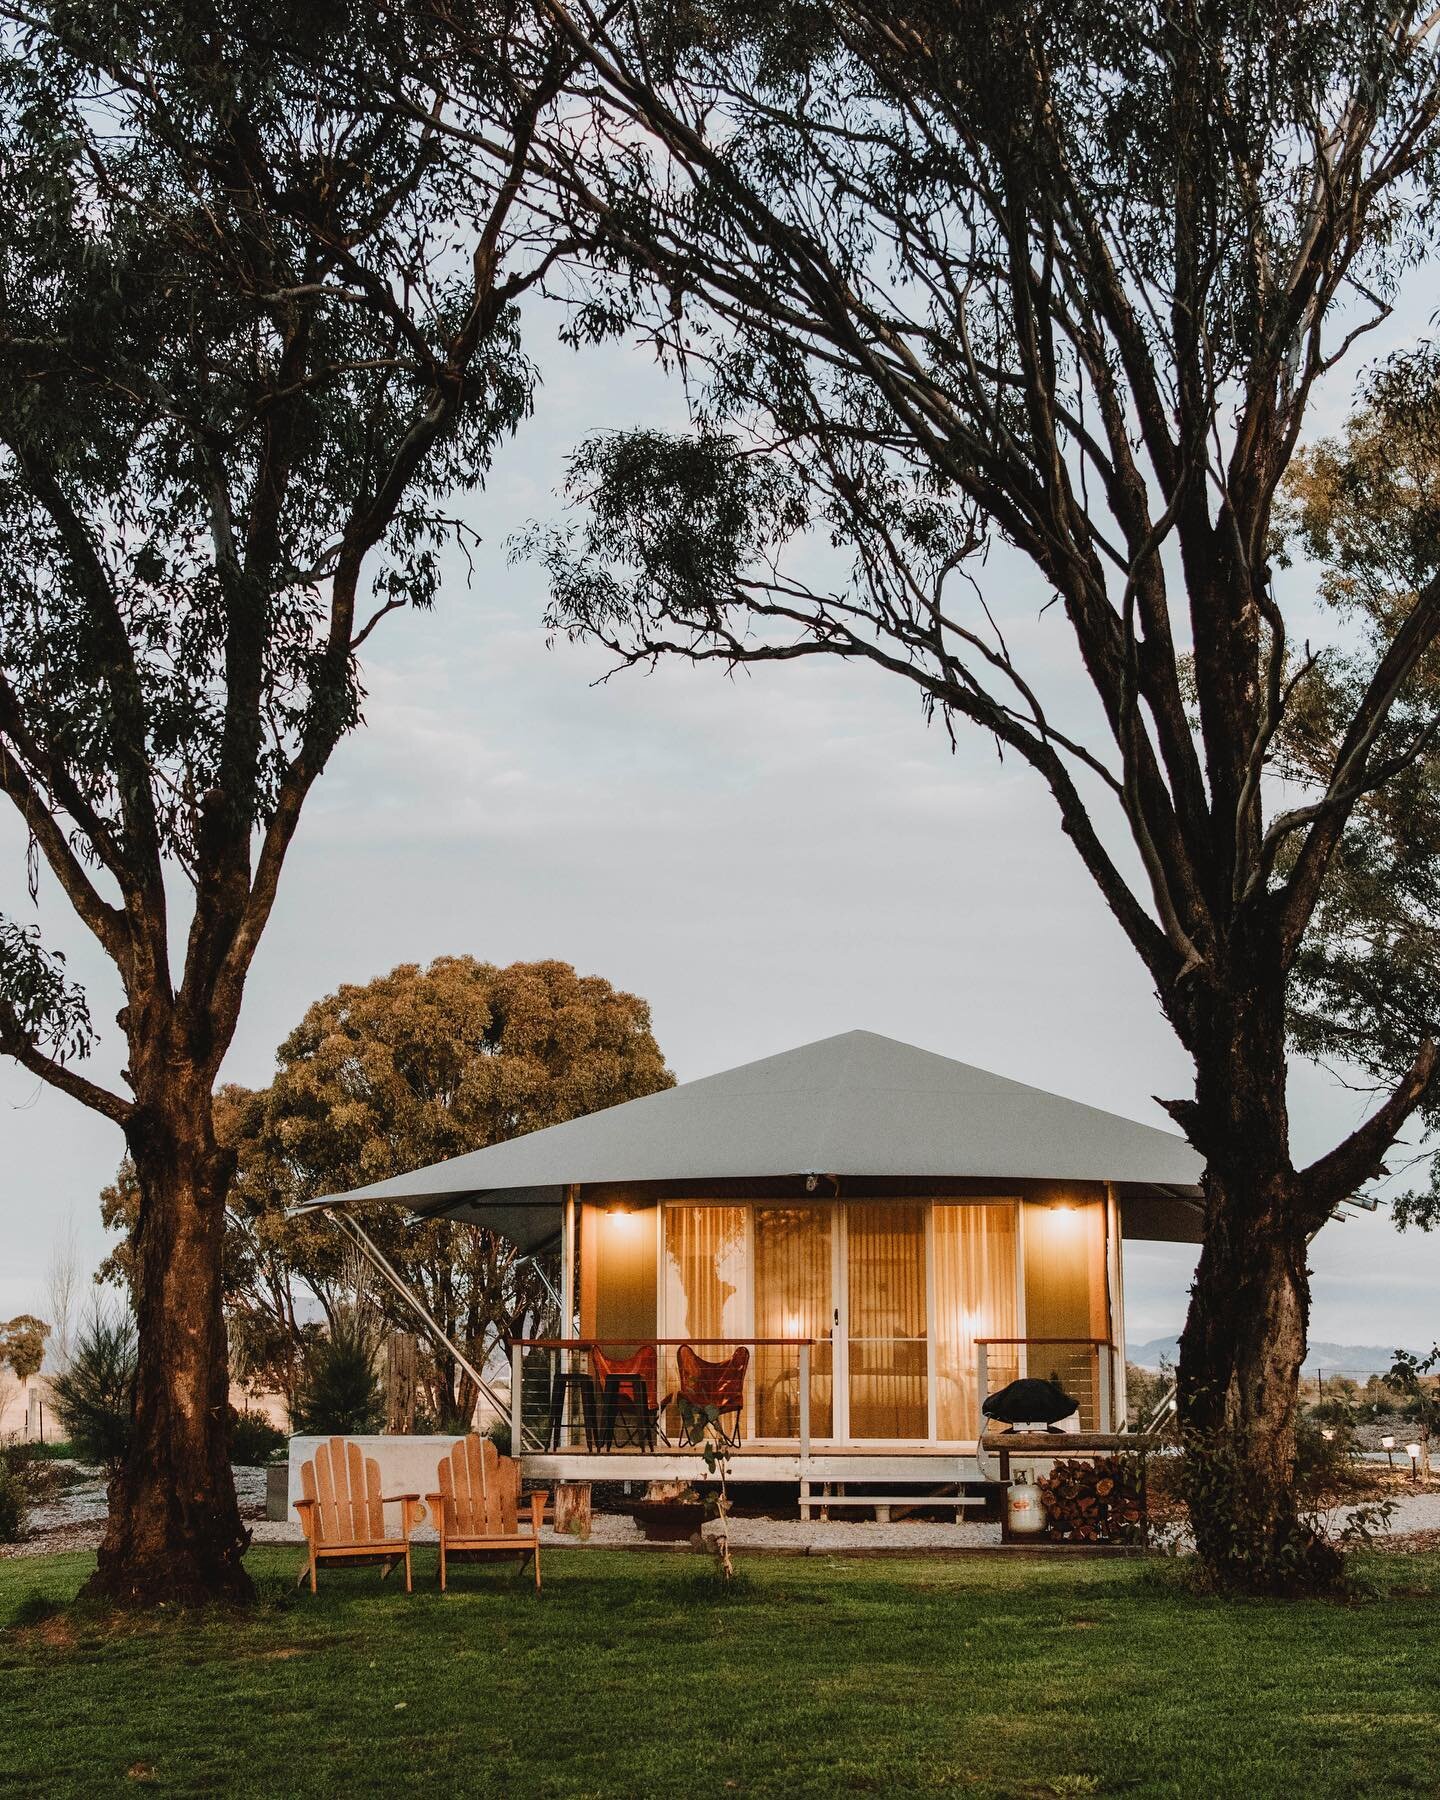 As the cool weather well &amp; truly sets in, it&rsquo;s time to start thinking about a cozy countryside escape! ❄️

Snuggle up by the fire pit at your very own glamping tent in the Mudgee countryside. To stay warm over winter, the luxury tent featur